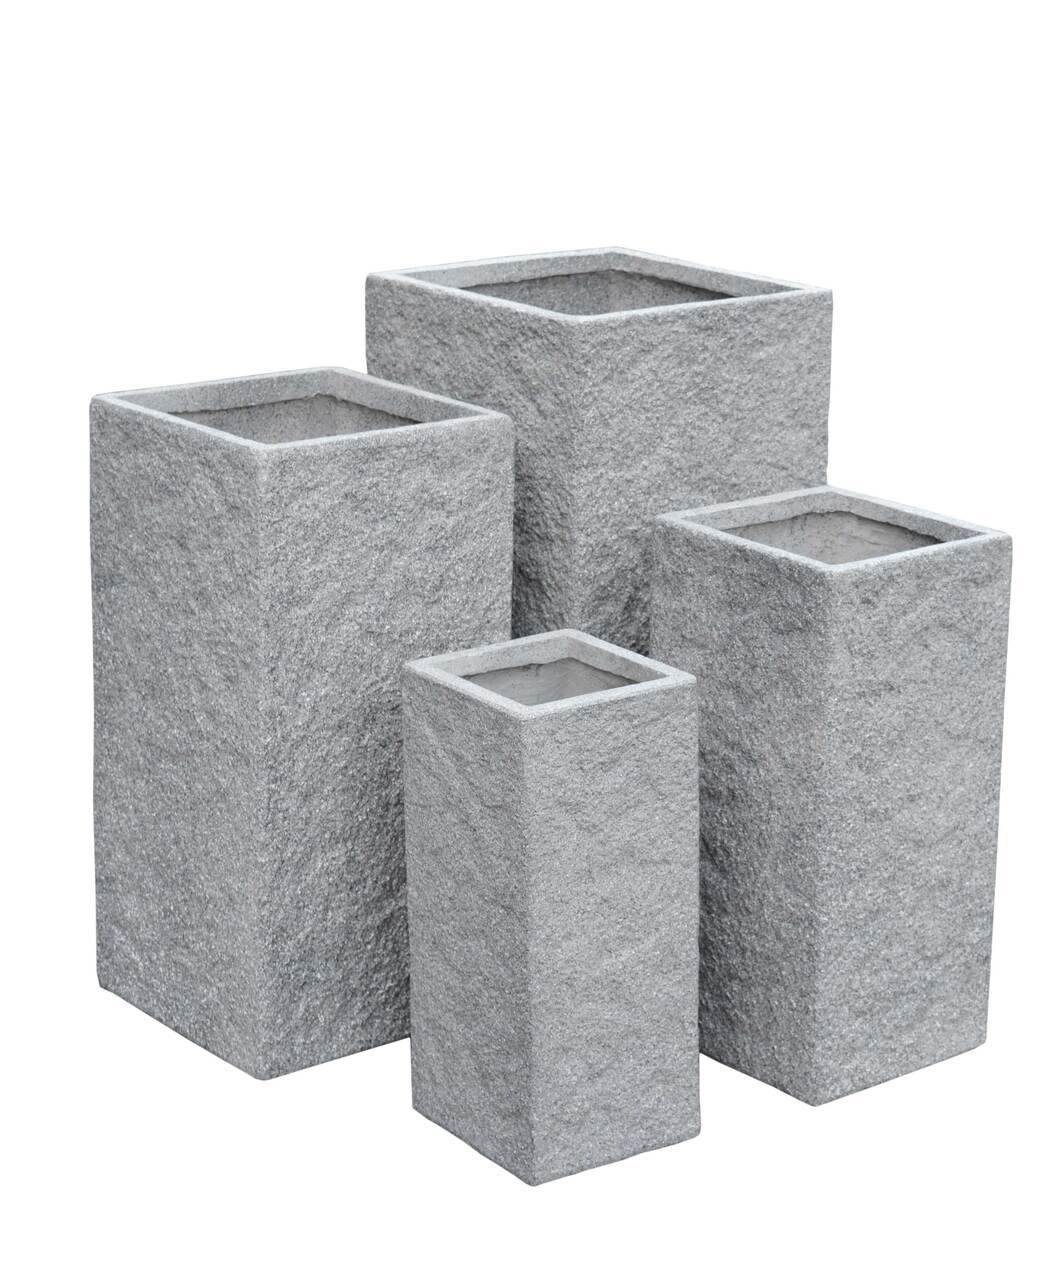 AFD Home Outdoor Decor Lion Stone Square Planter Set of 4 in Gray Finish